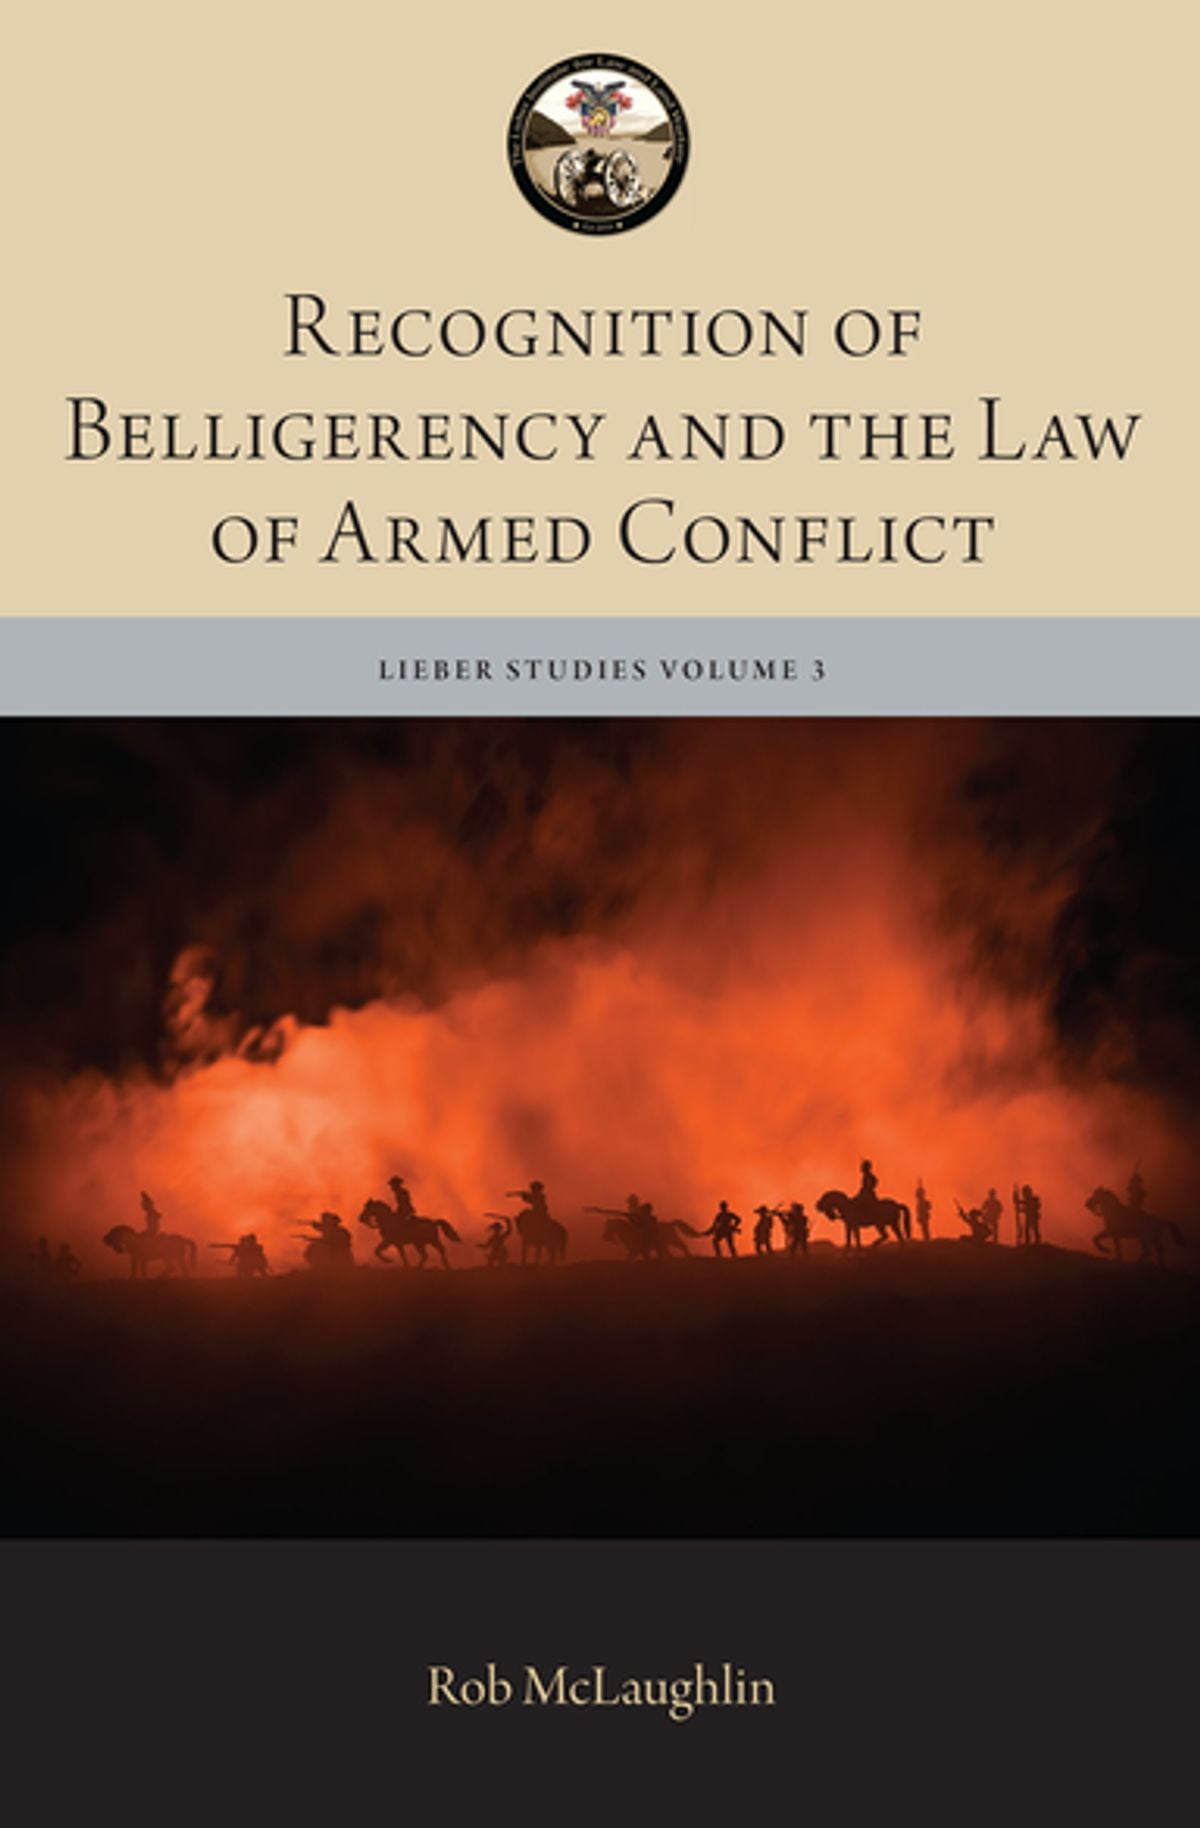 what is law of armed conflict?